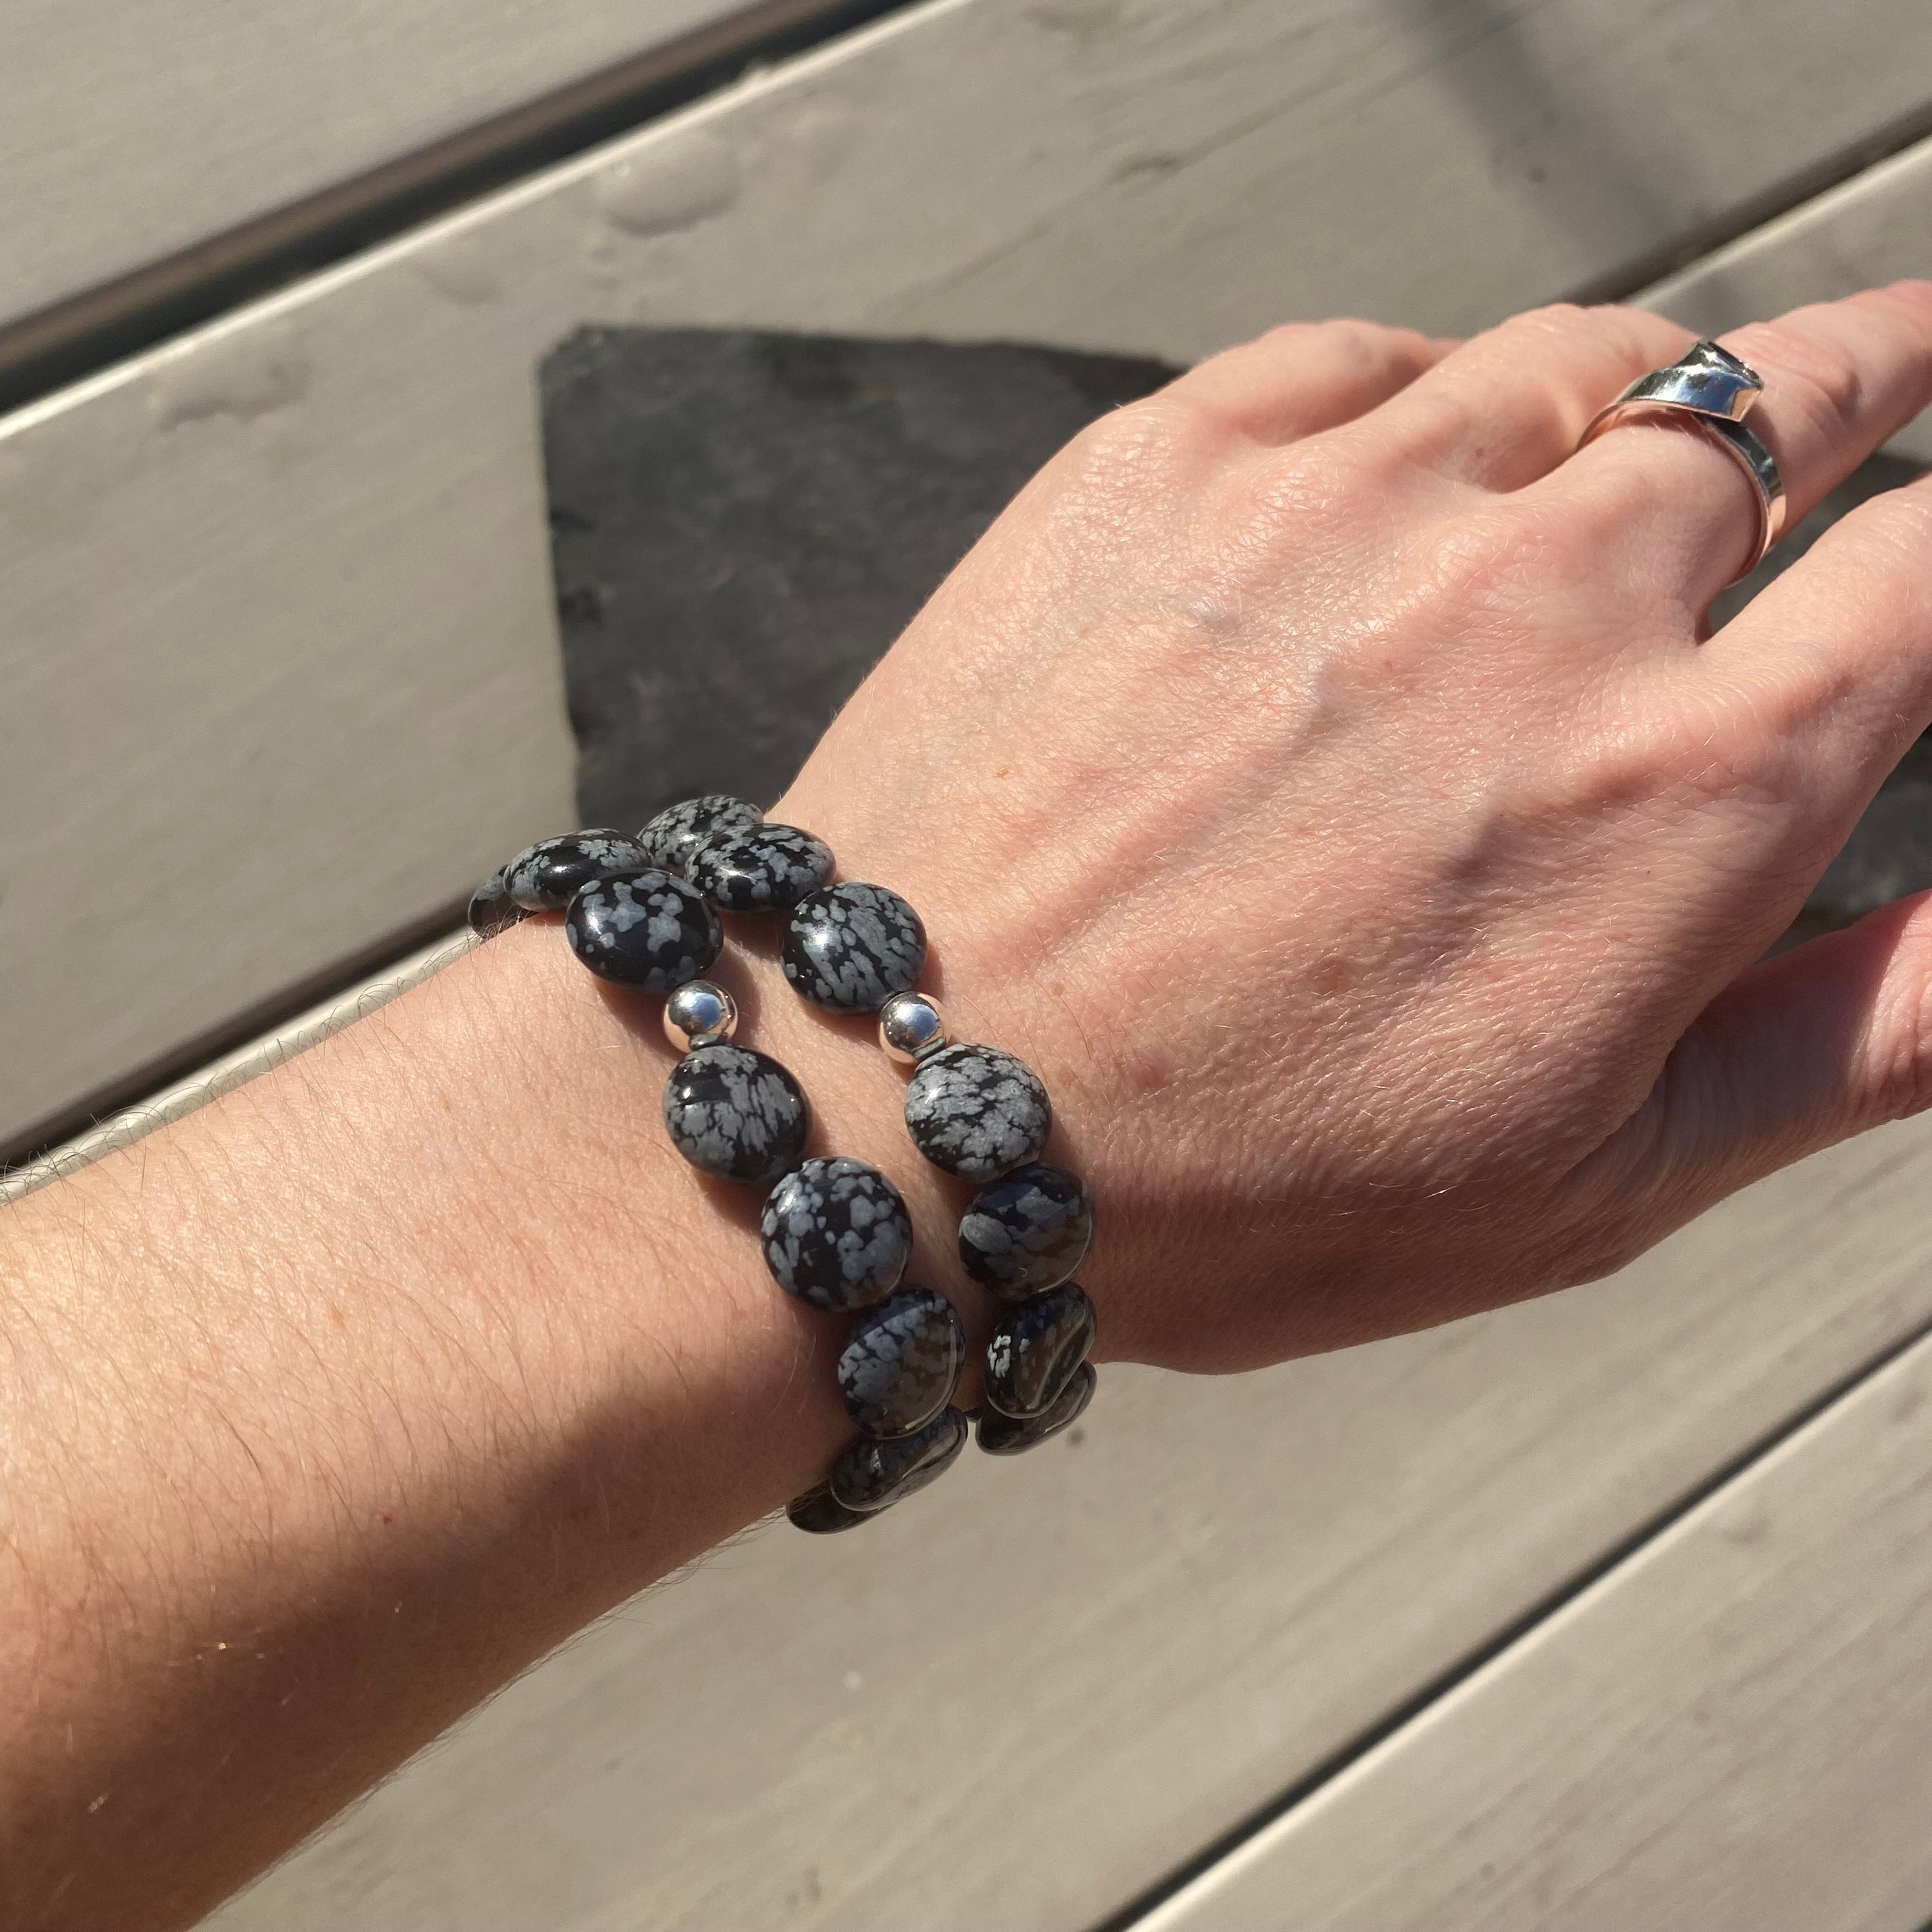 Snowflake Obsidian Bracelet - Gemstone Coin Beads with silver spacer - Crystal Healing Jewellery